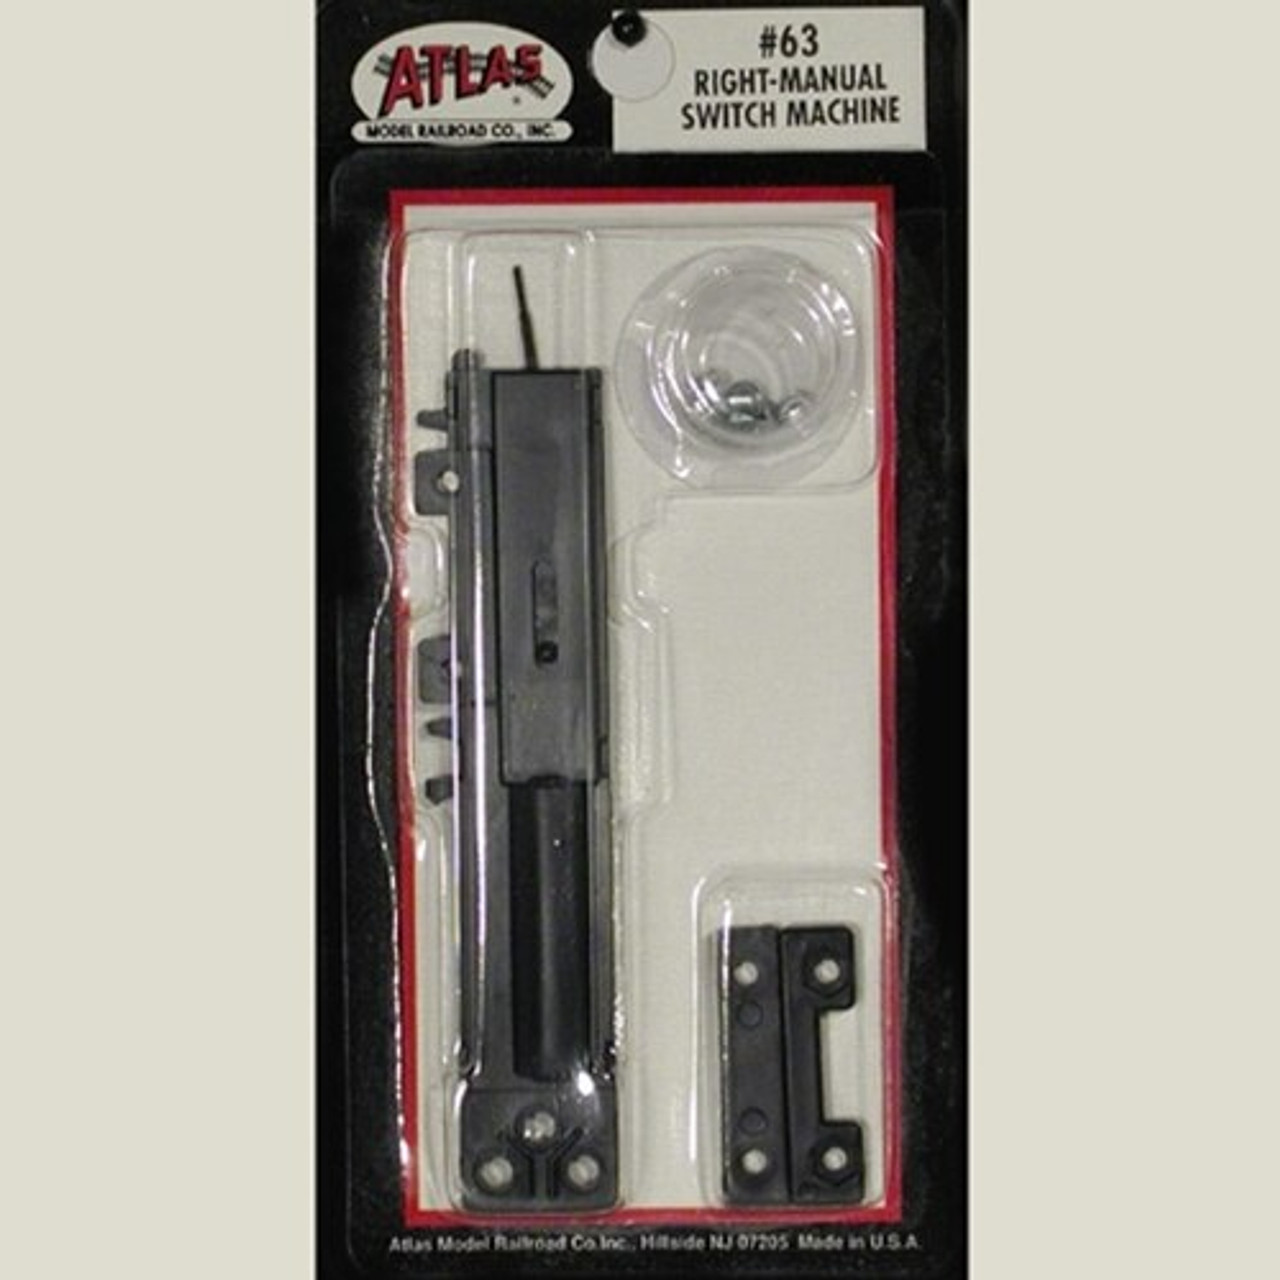 Atlas 0066 Ho Deluxe Under Table Switch Machine